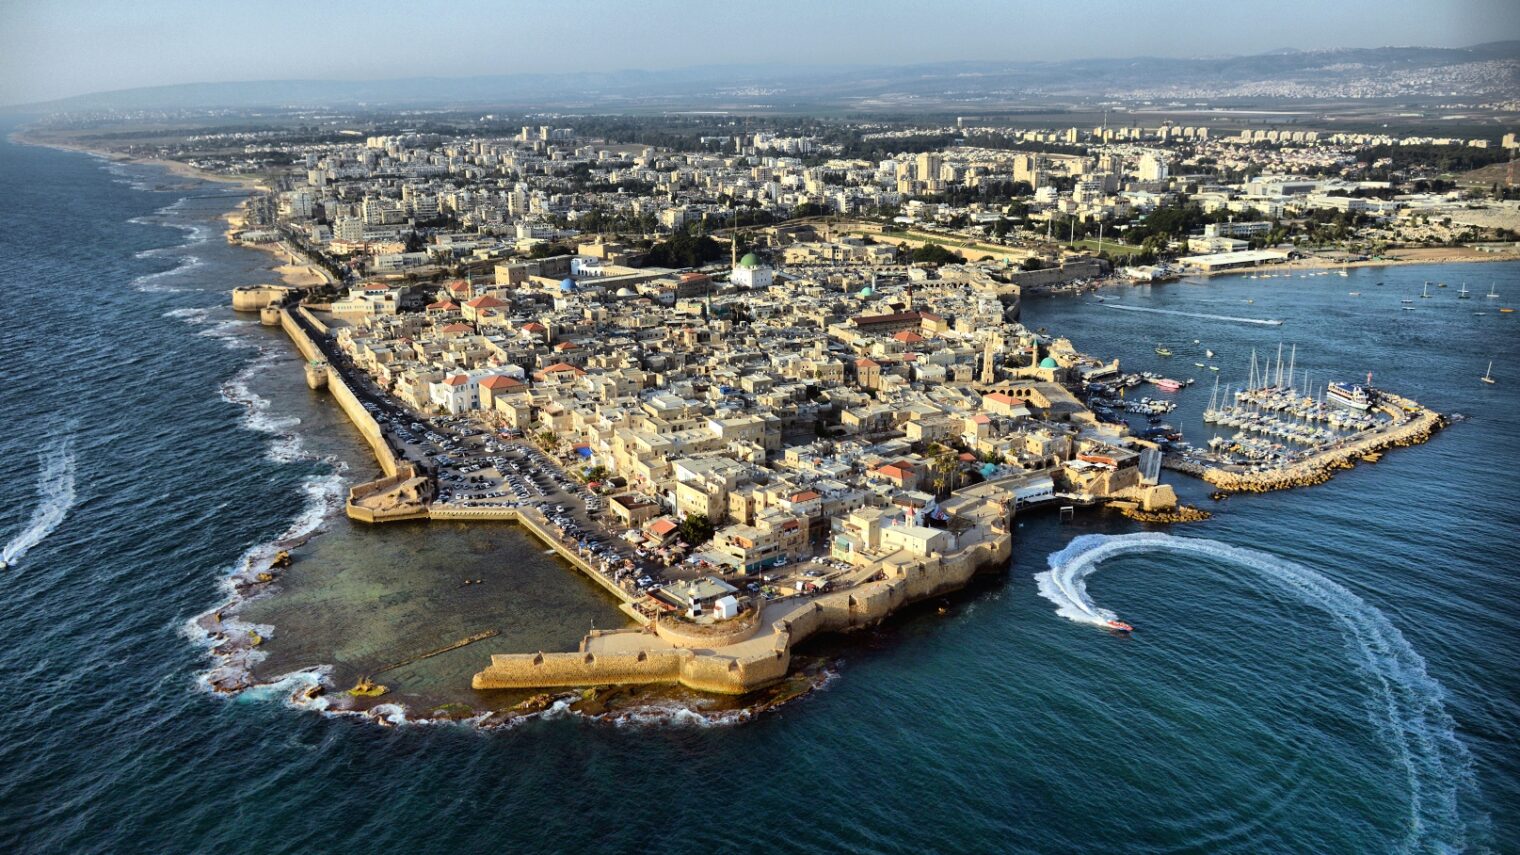 View of Acre from the south. Photo by Yigal Dekel